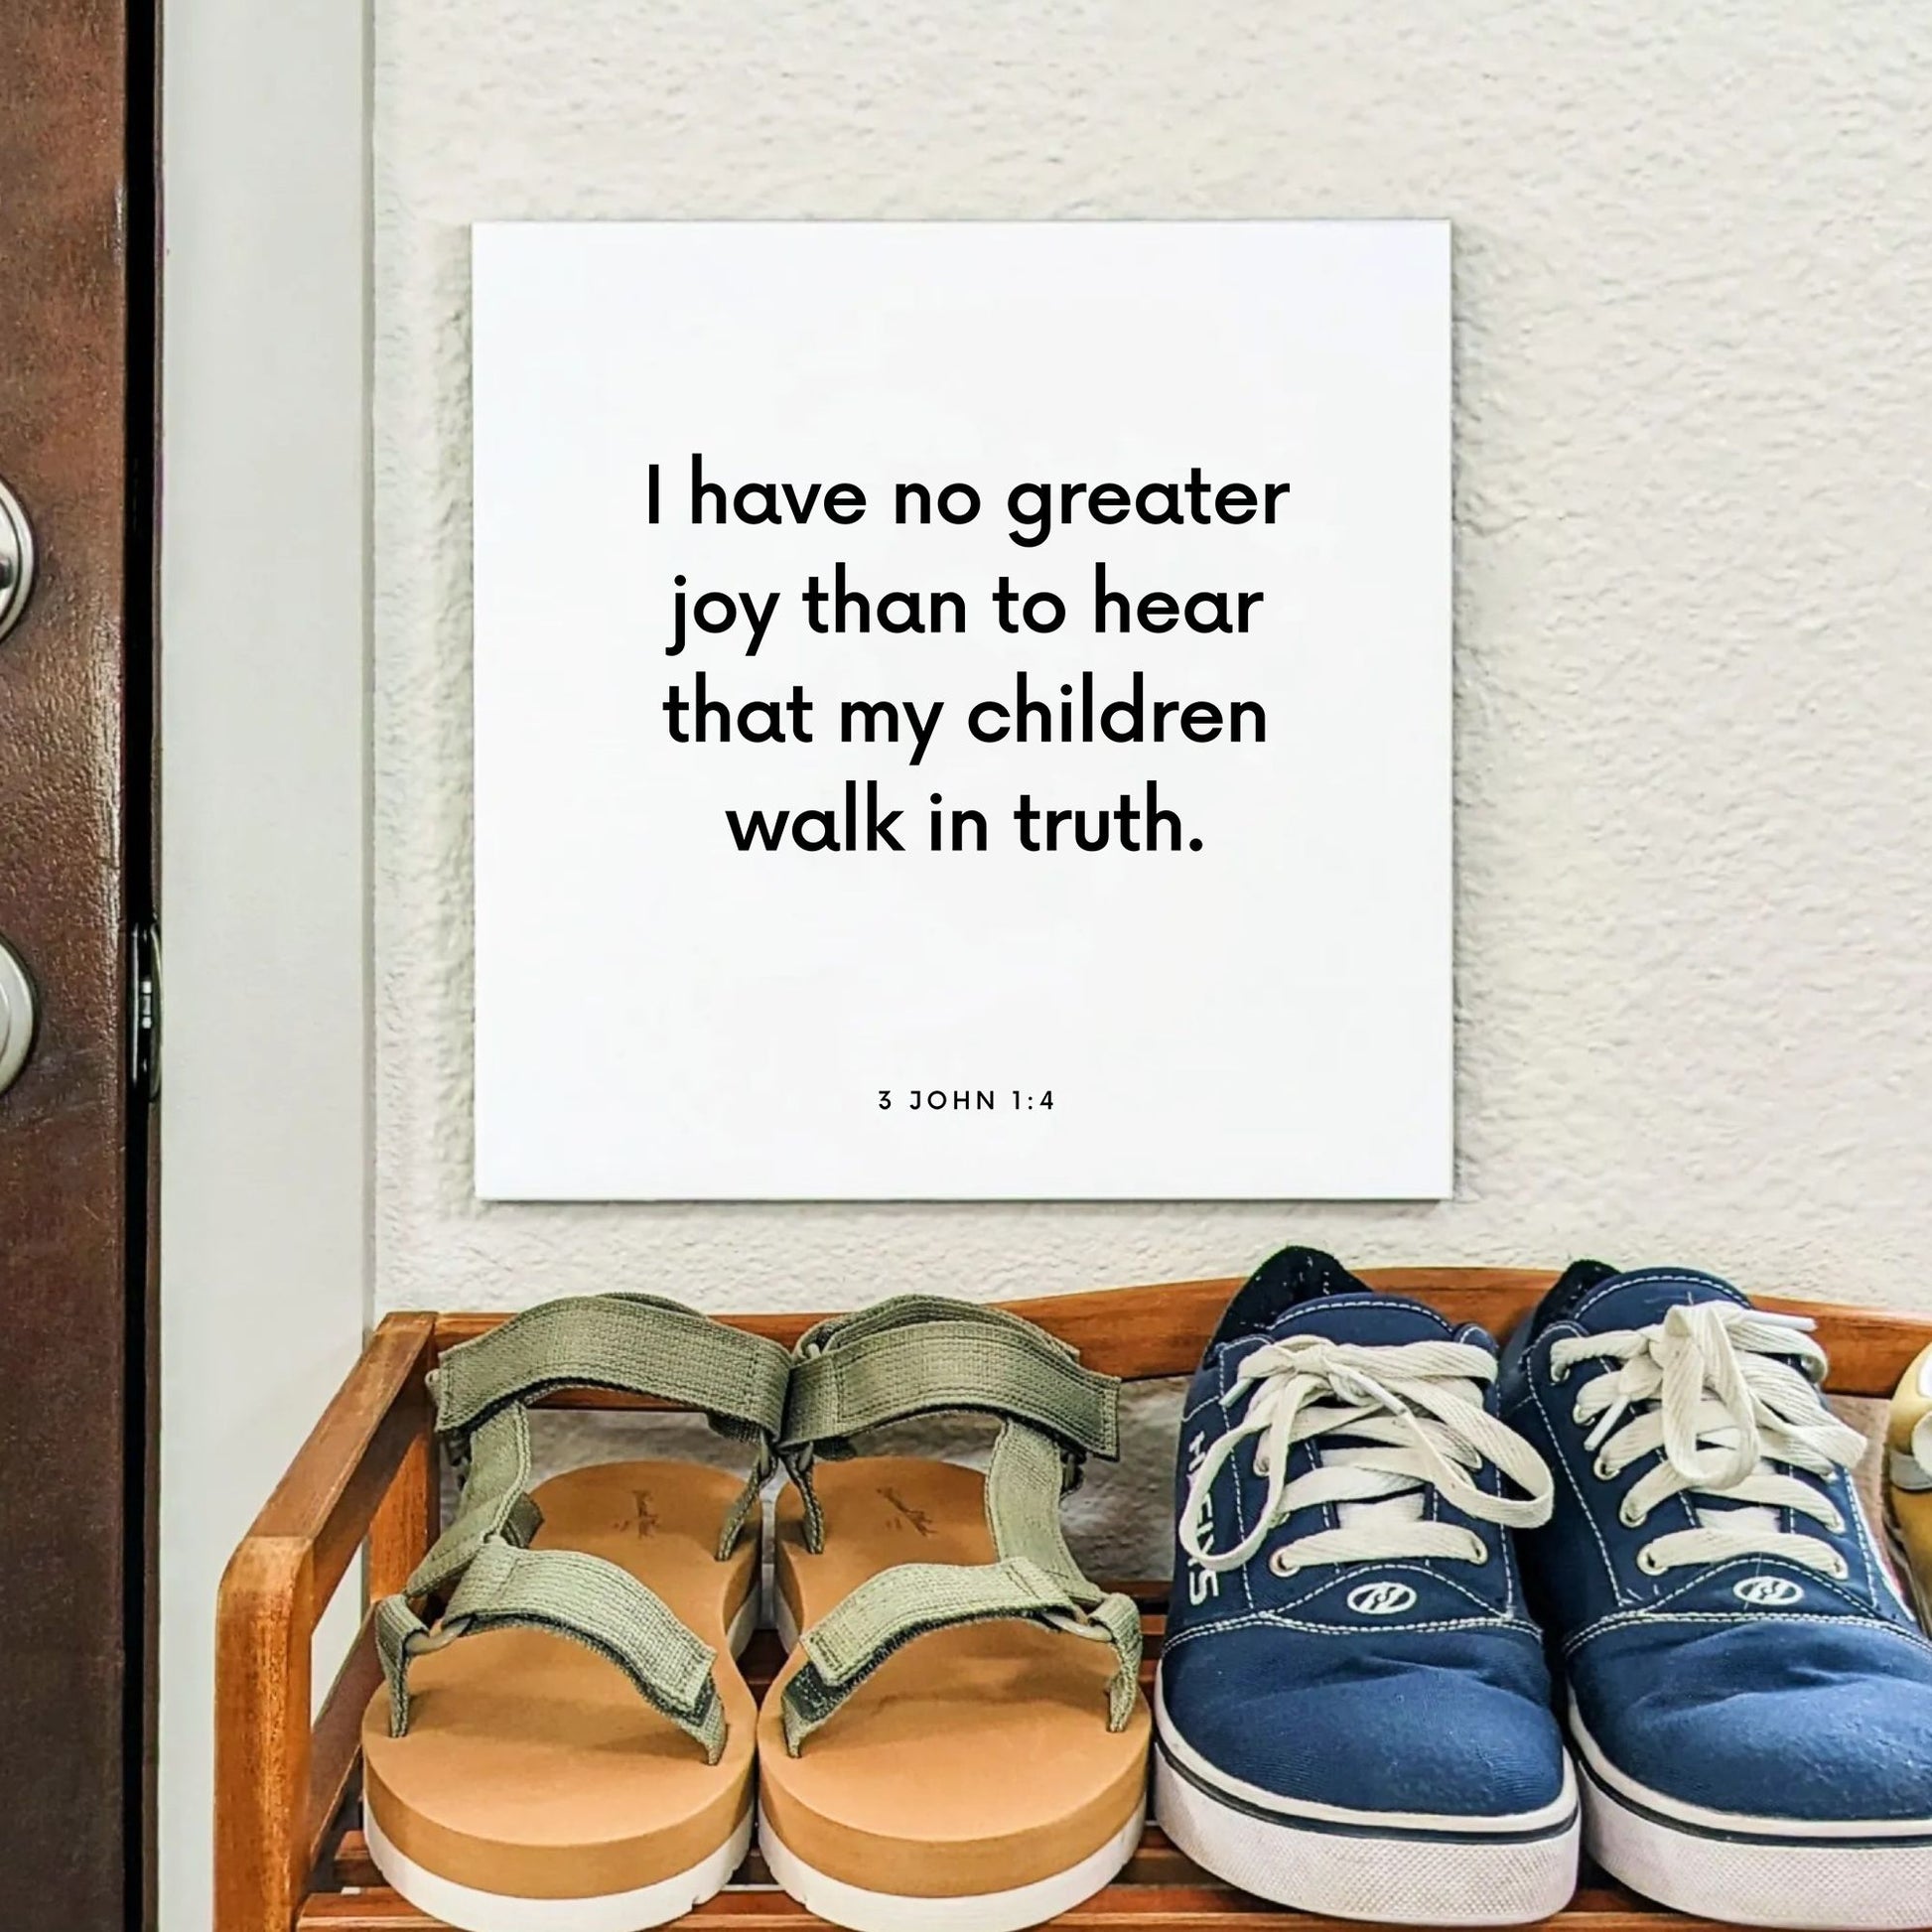 Shoes mouting of the scripture tile for 3 John 1:4 - "No greater joy than to hear that my children walk in truth"